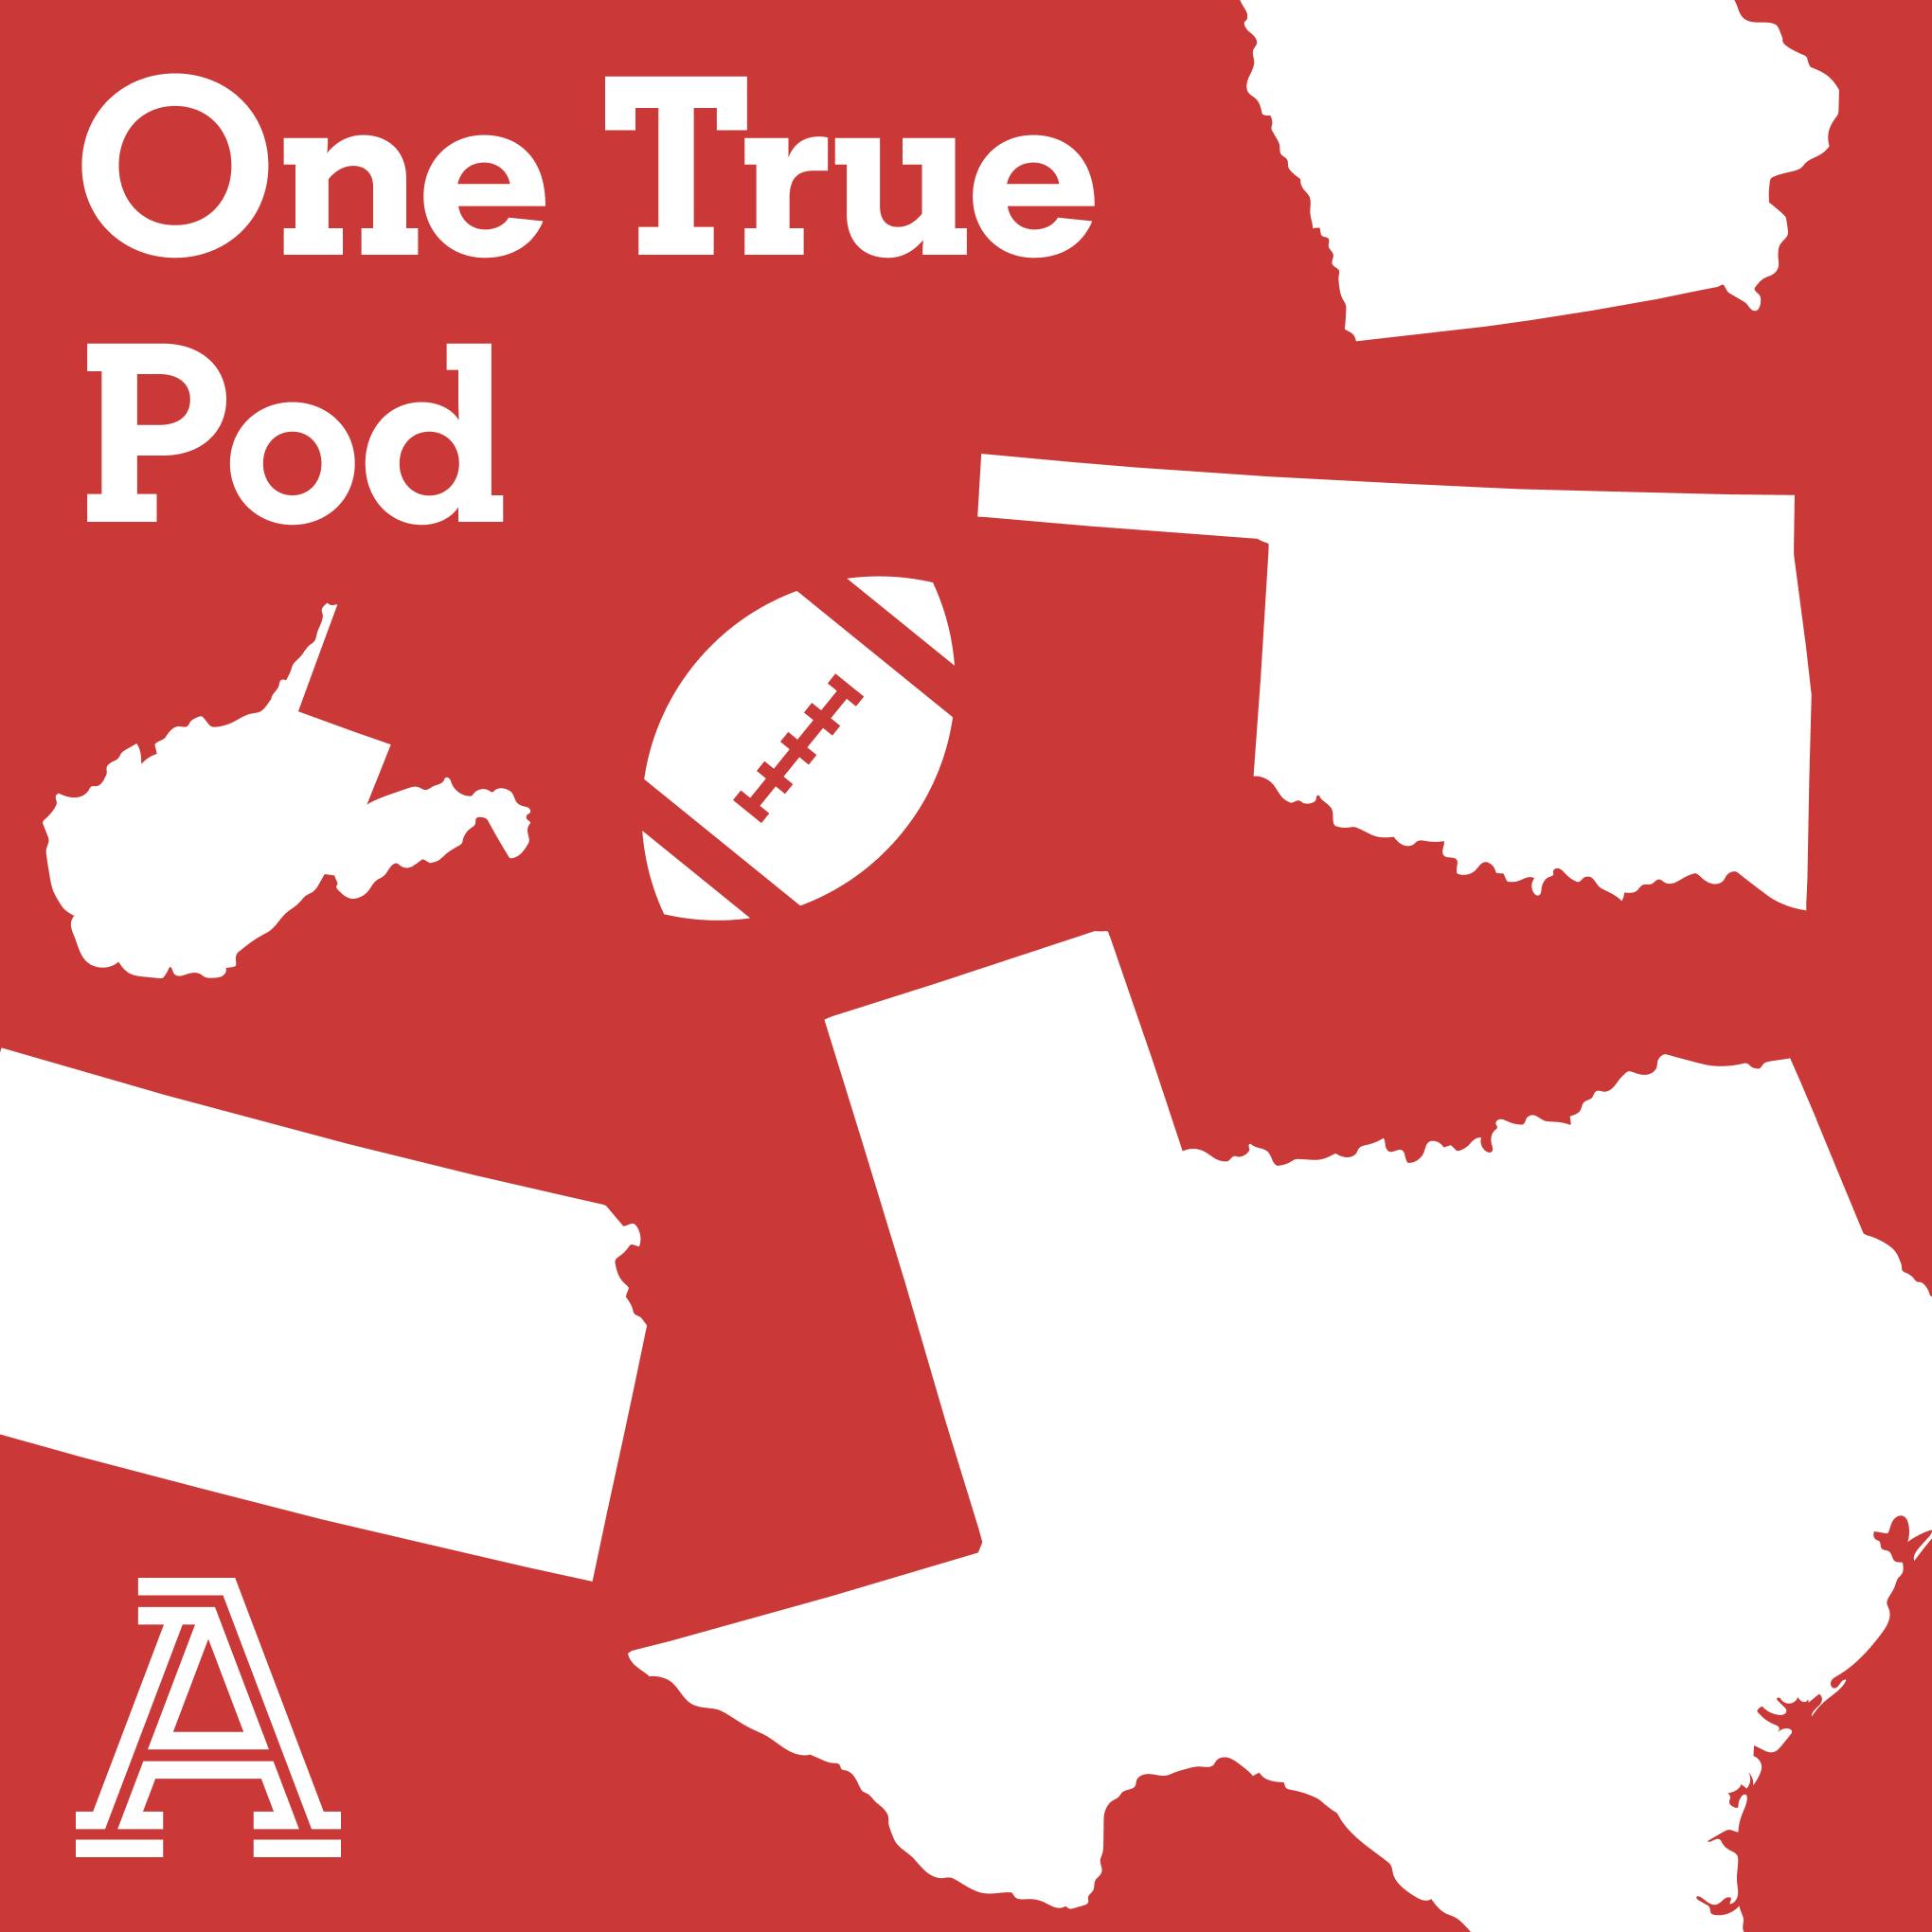 One True Pod: Matt Wells is out at Texas Tech; what's next in Lubbock?